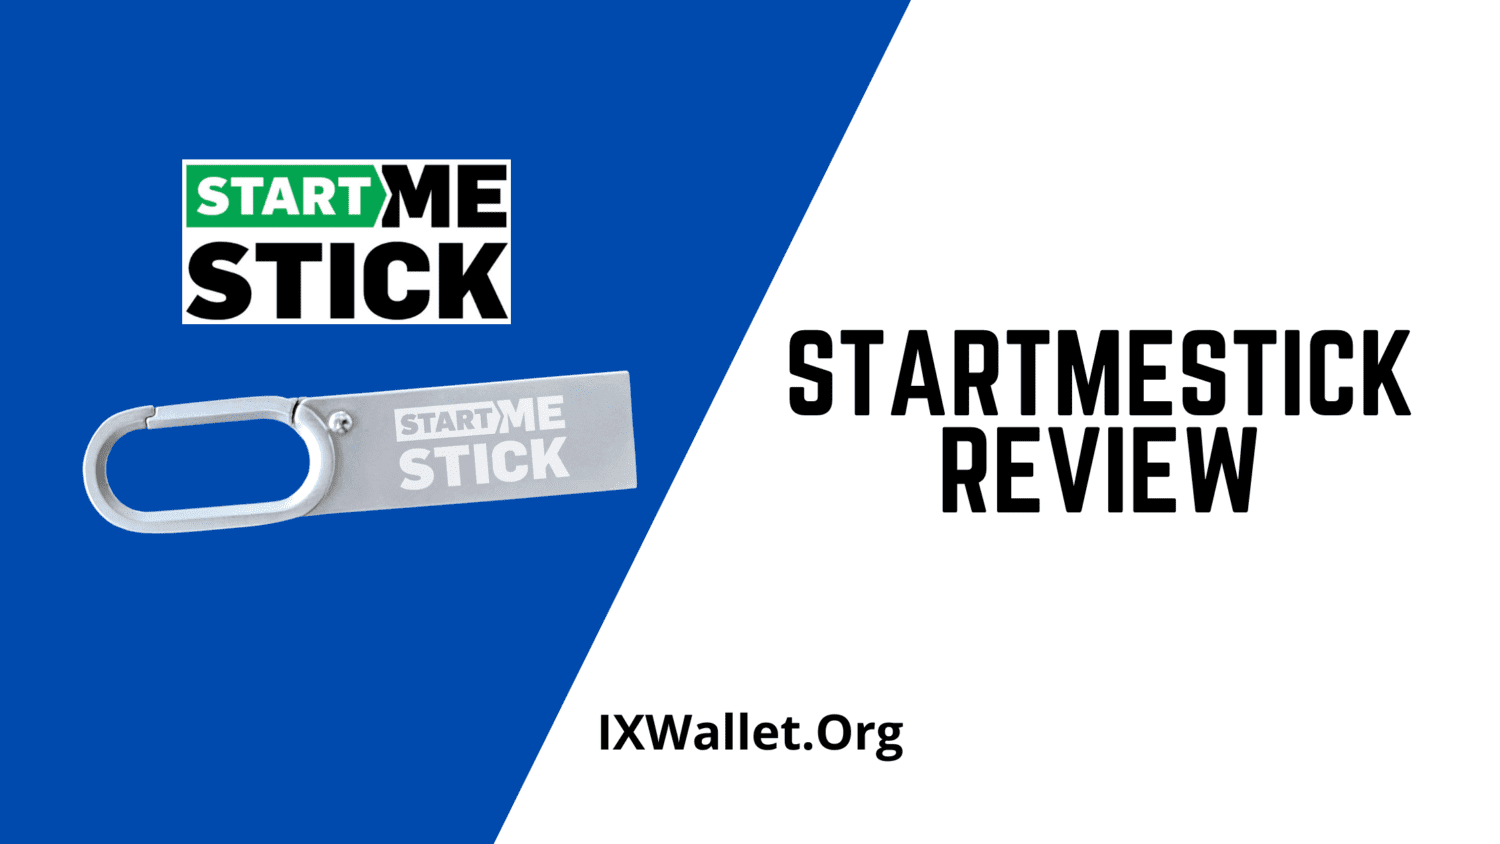 StartMeStick Reviews: All You Need To Know